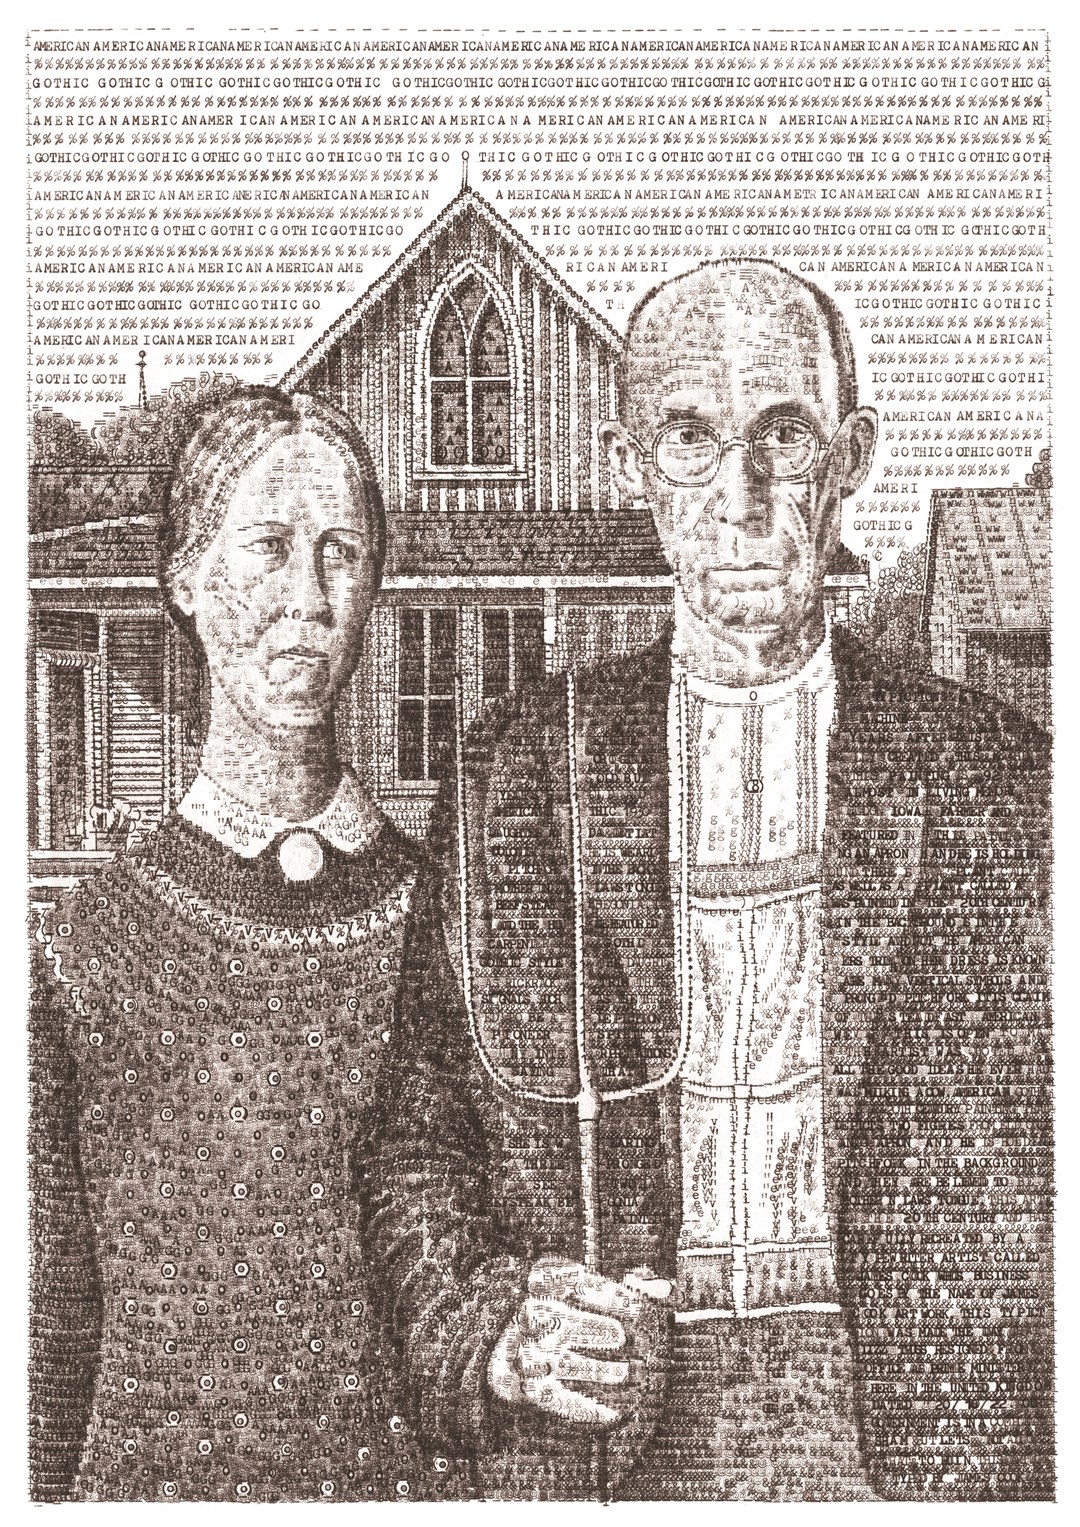 James Cook’s version of American Gothic (James Cook)